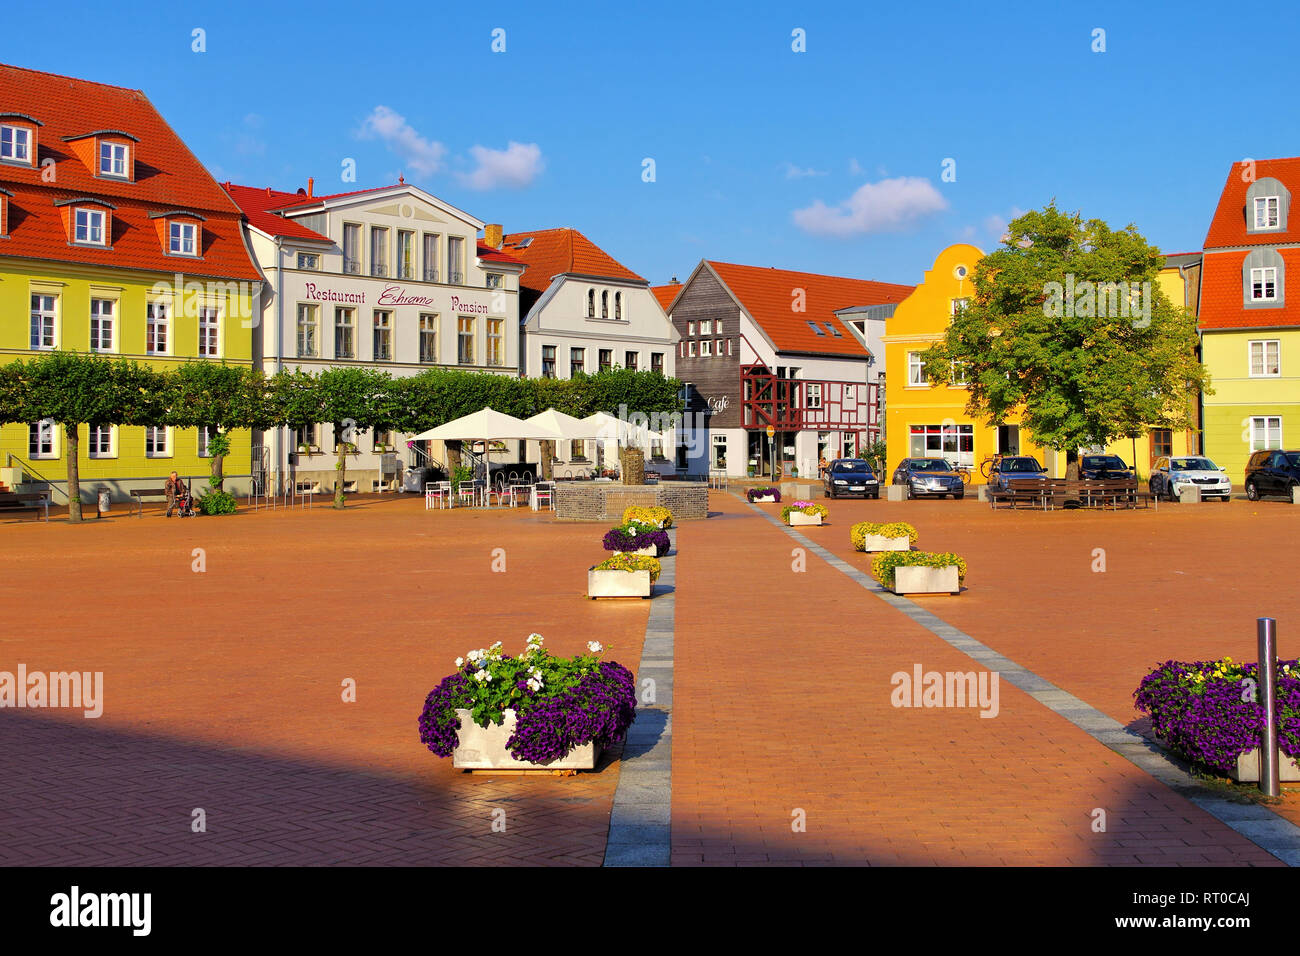 Barth market square, an old town on the Bodden in Germany Stock Photo